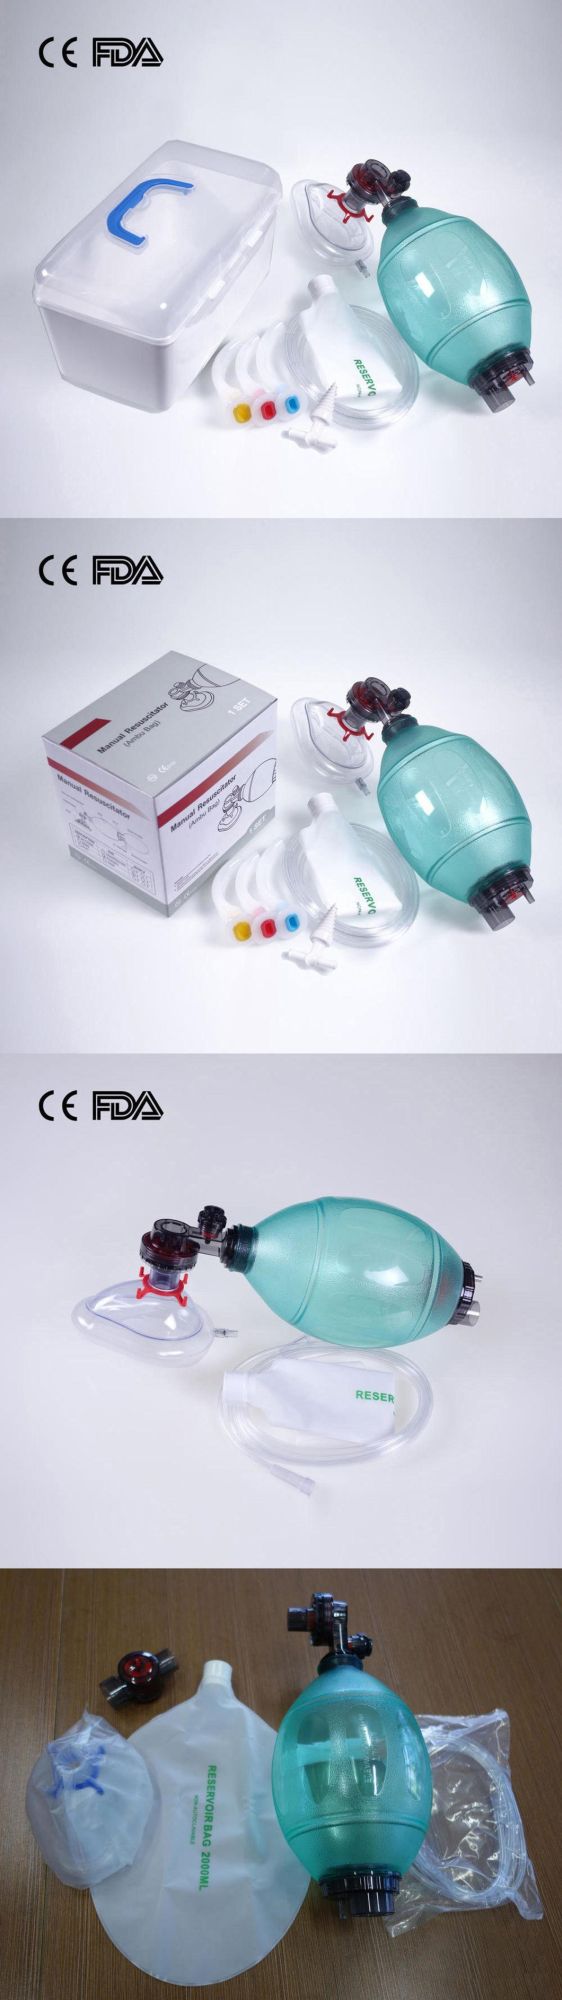 PVC Anesthesia Mask Disposable Medical PVC Anesthesia Mask Factory Adult M, Size 4# with CE FDA